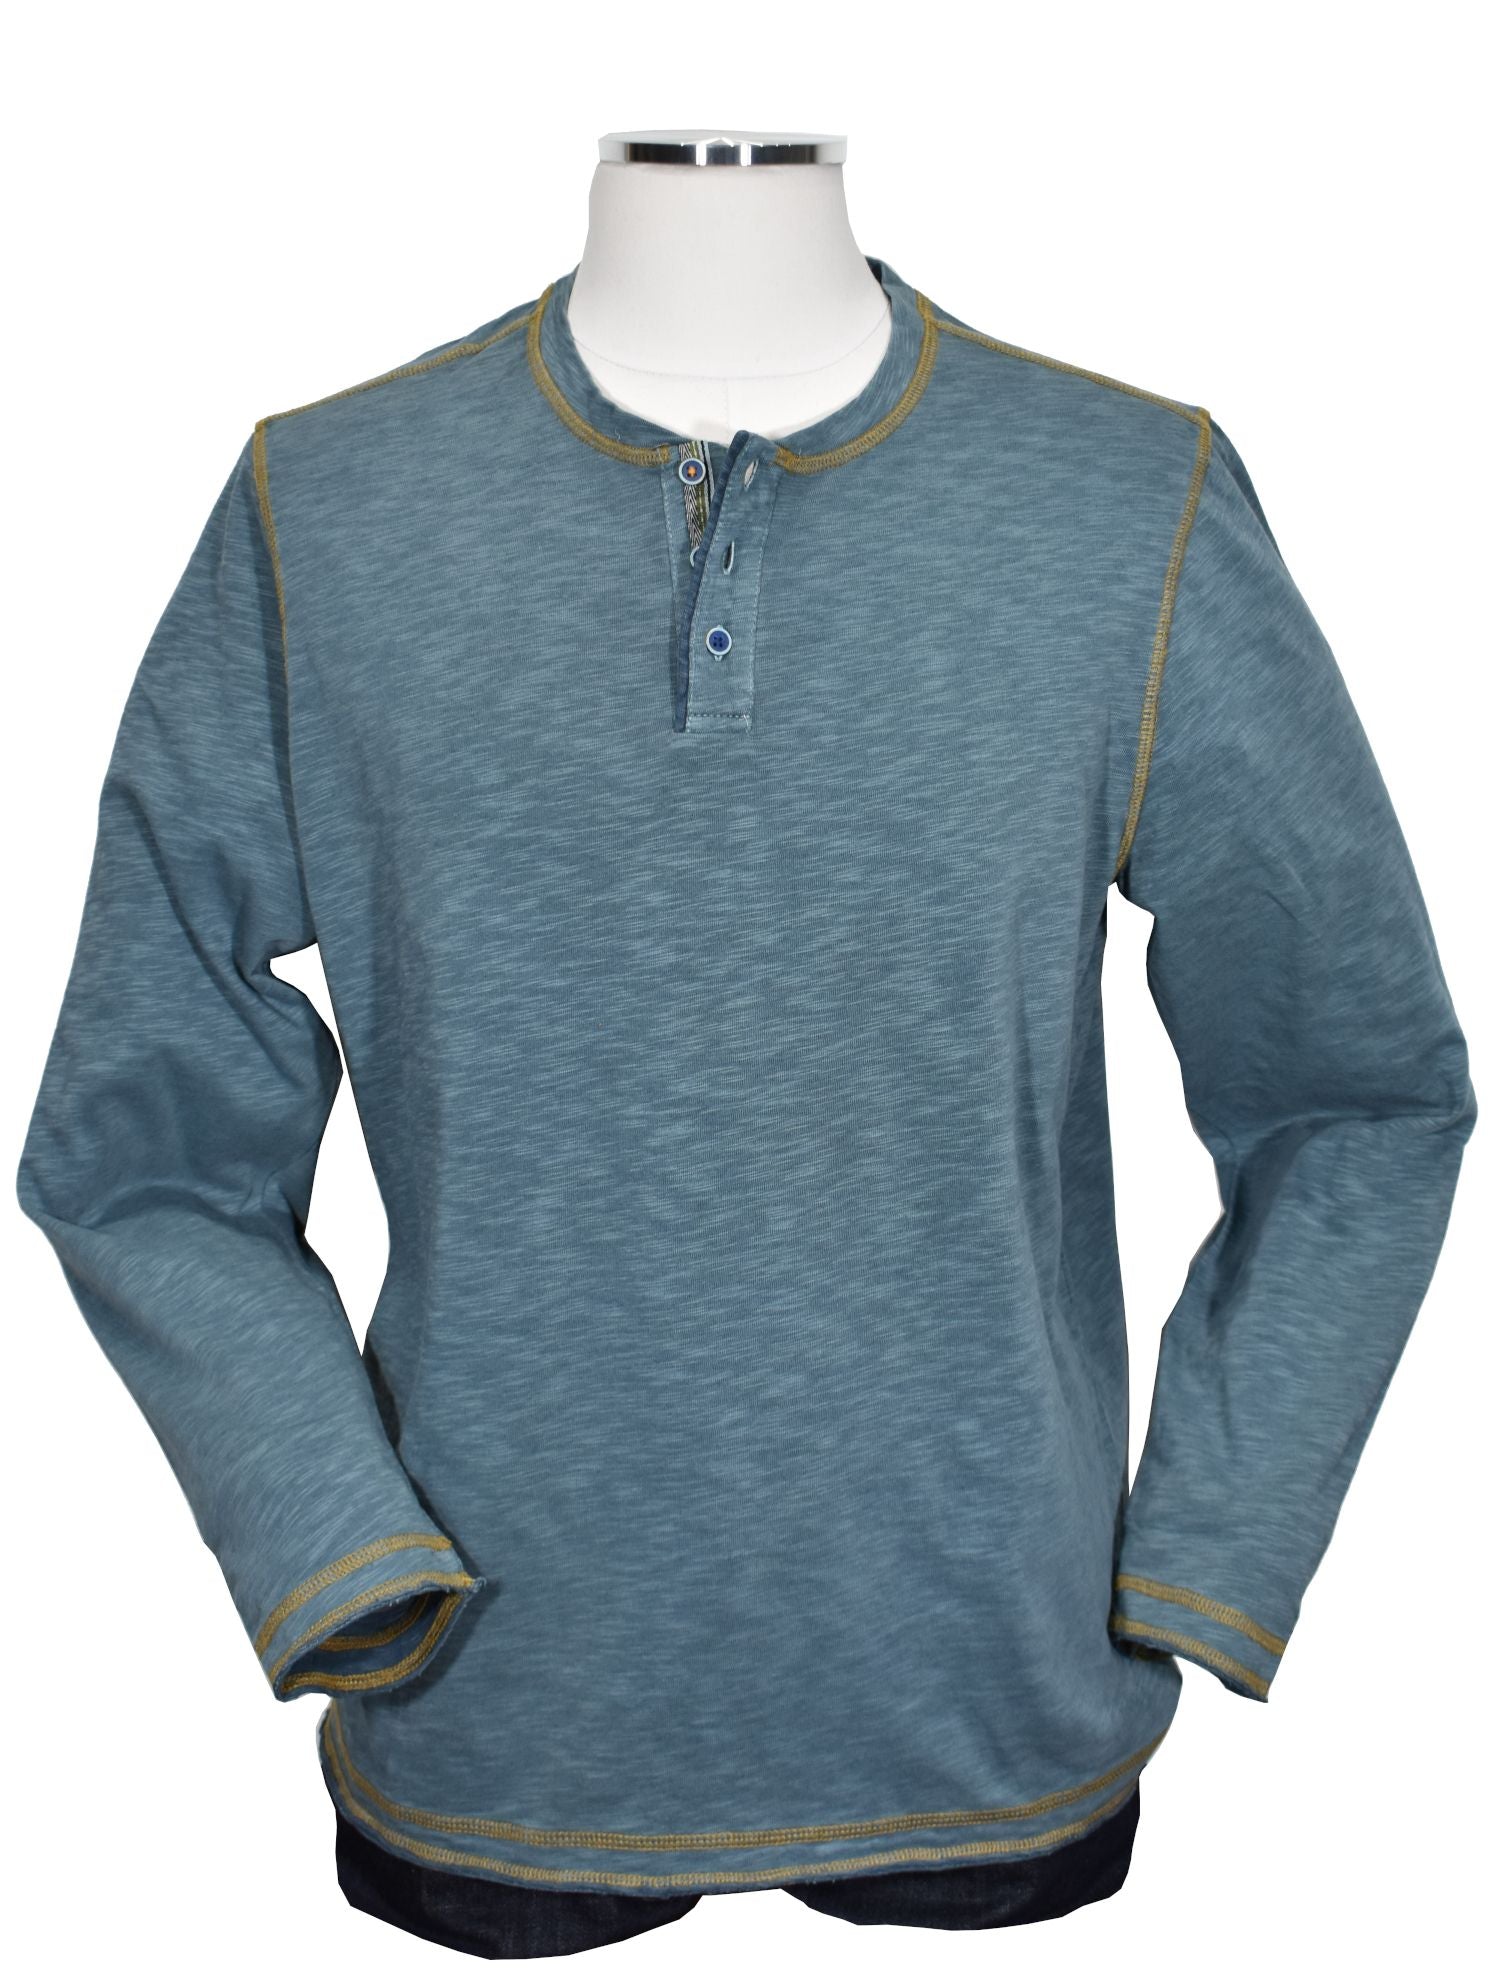 Stay comfortable and stylish with this Washed Slub Henley! Crafted from 100% soft washed cotton, its slub plaited jersey fabric creates an effortlessly cool and casual look. Multi circular stitch detailing around the cuffs and waistband add a touch of style, while its classic fit is perfect for any relaxed setting. Elevate your casual wardrobe with this must-have Henley!